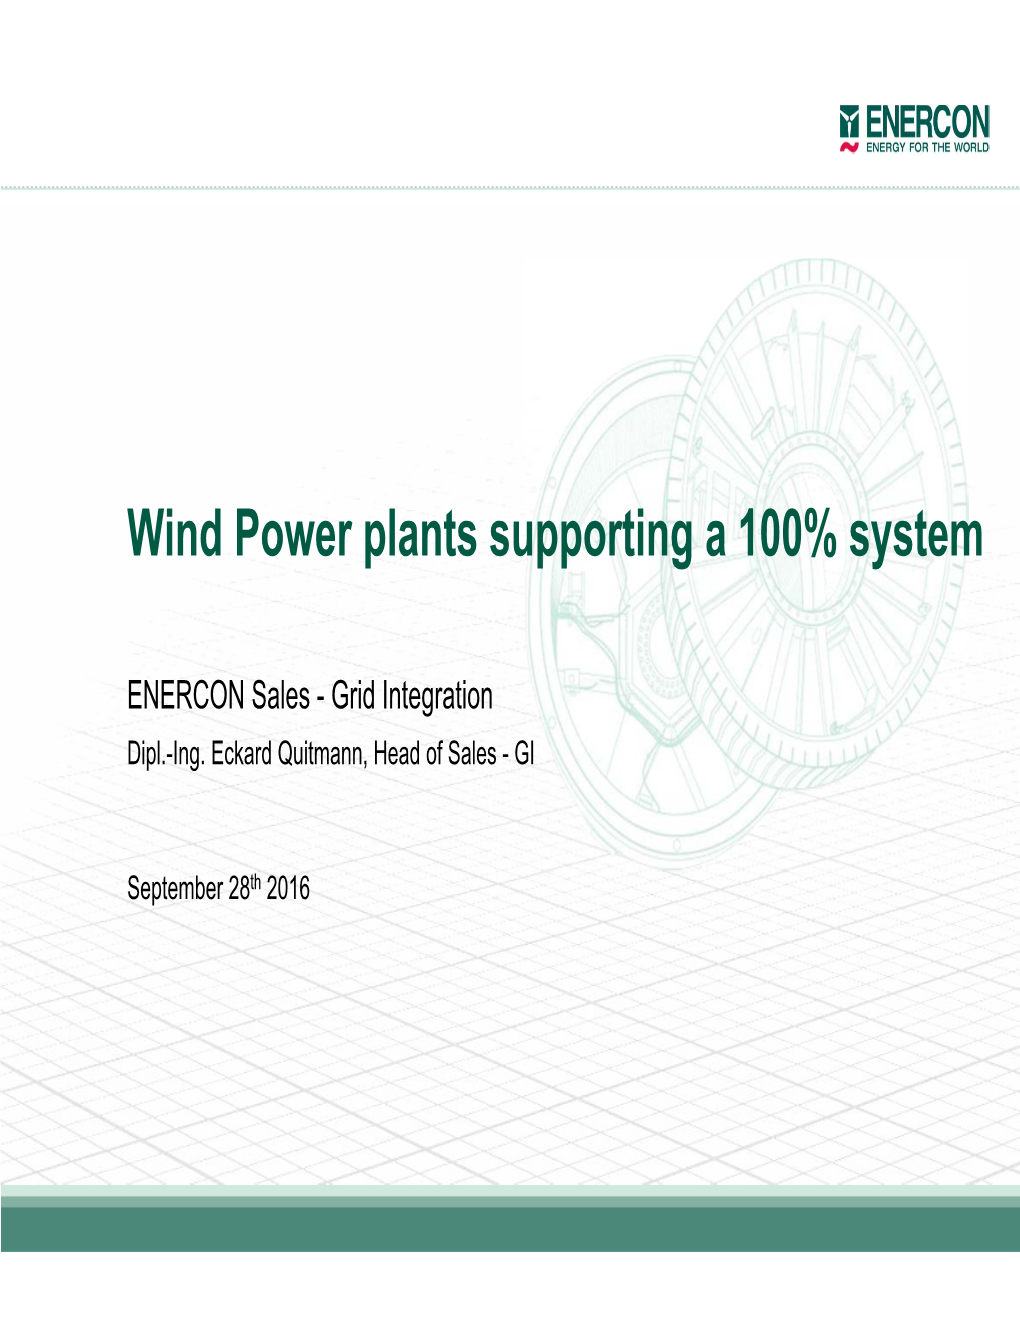 Wind Power Plants Supporting a 100% System